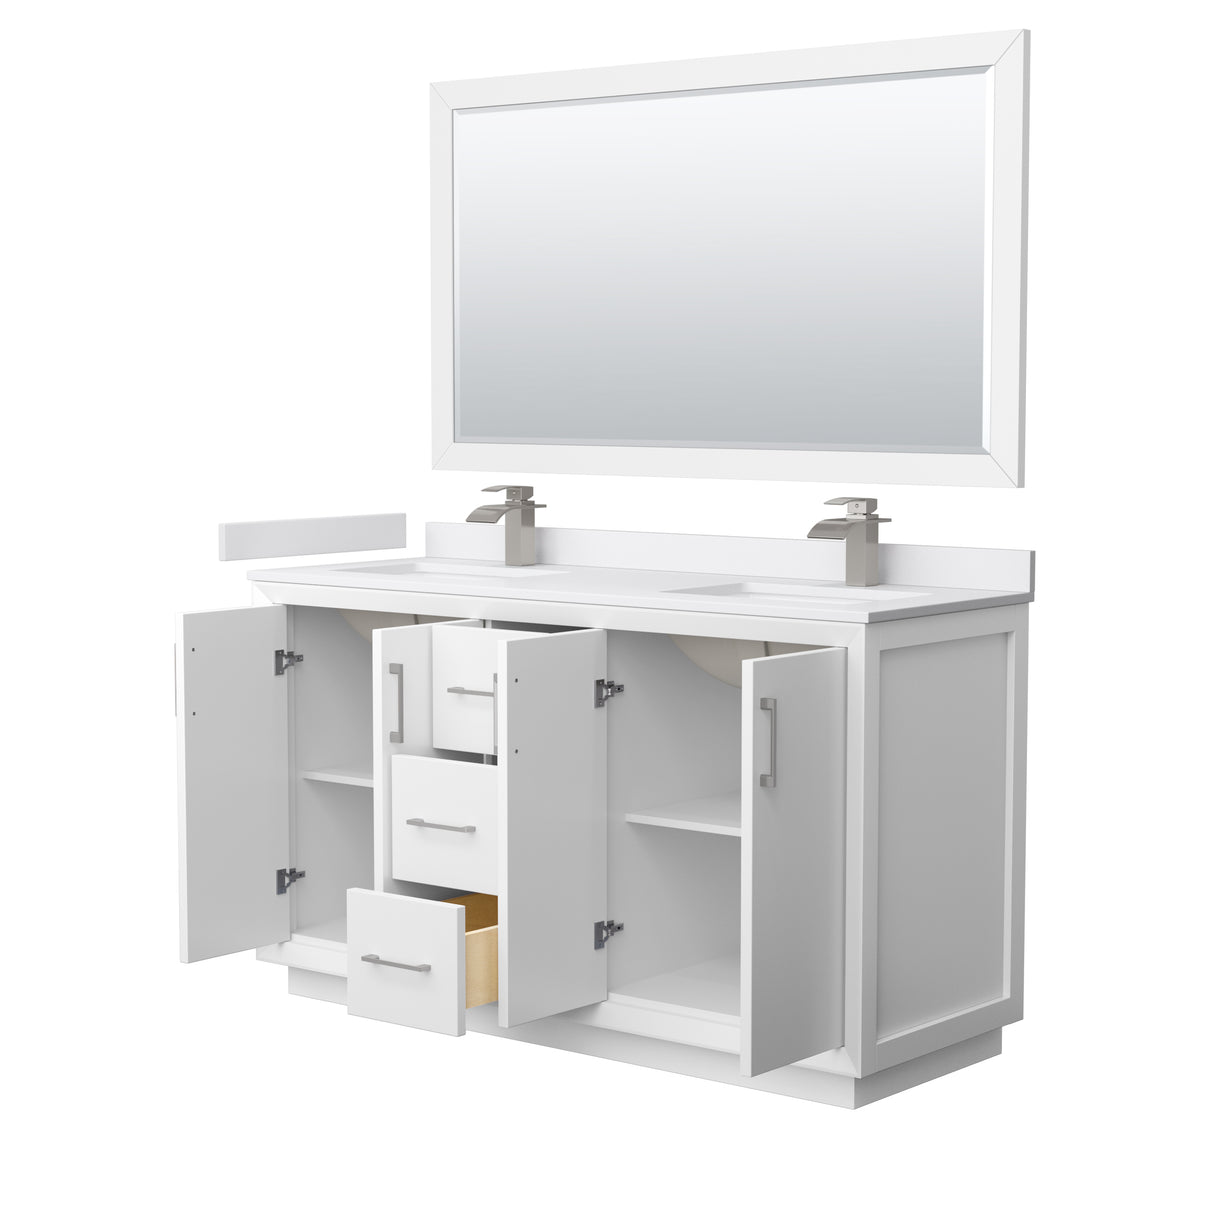 Strada 60 Inch Double Bathroom Vanity in White White Cultured Marble Countertop Undermount Square Sink Brushed Nickel Trim 58 Inch Mirror